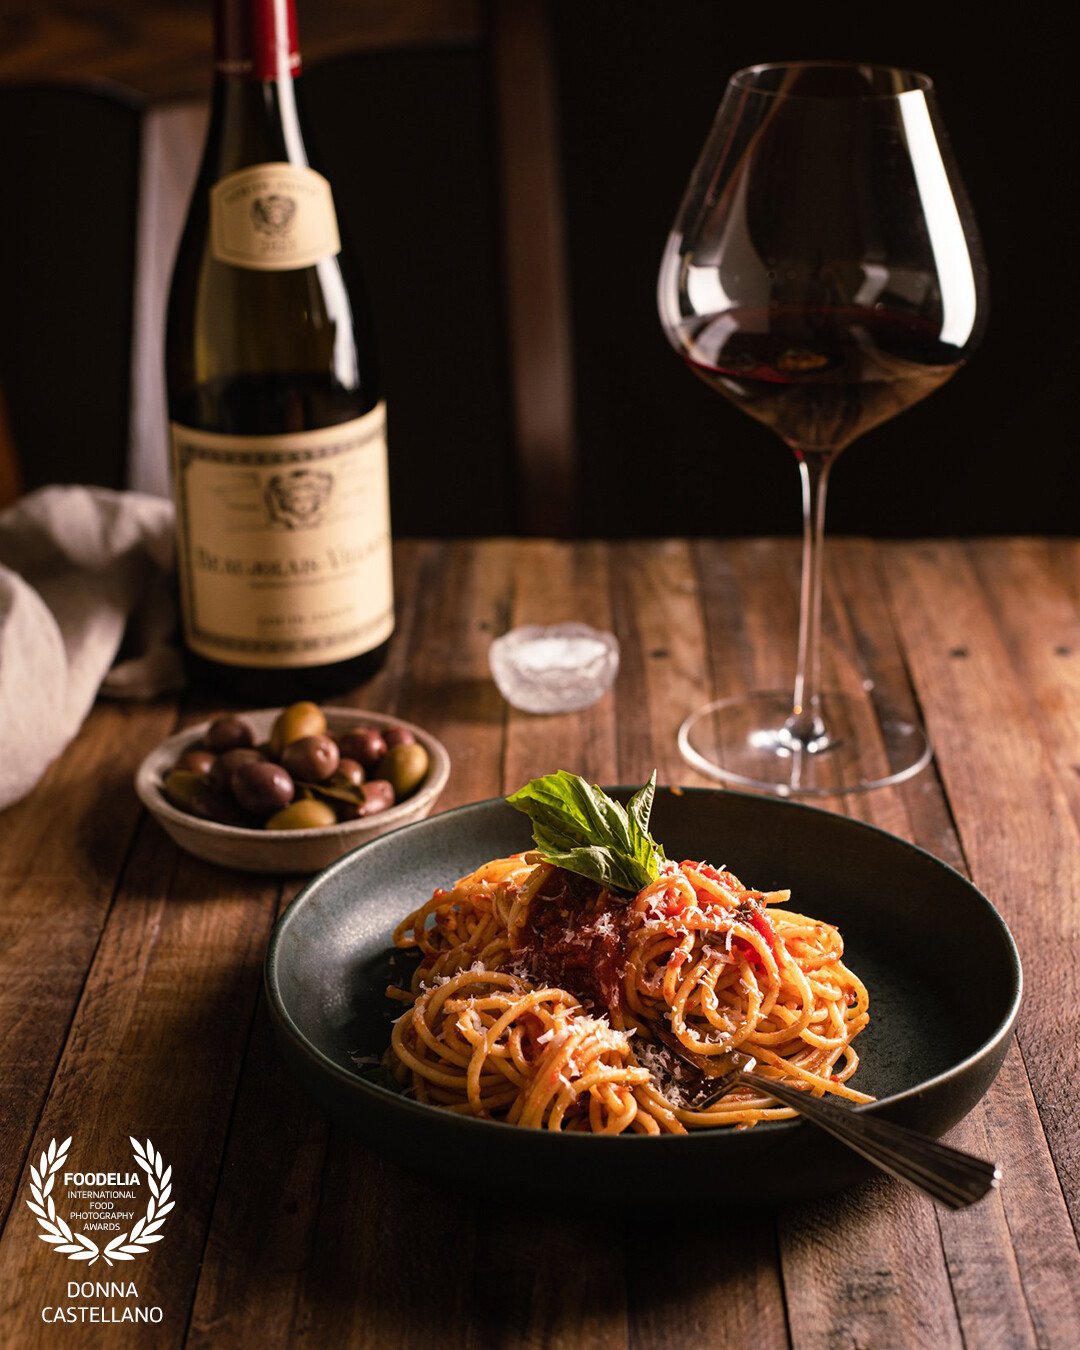 There is something so special about the simplicity of a dish of spaghetti and a glass of wine.